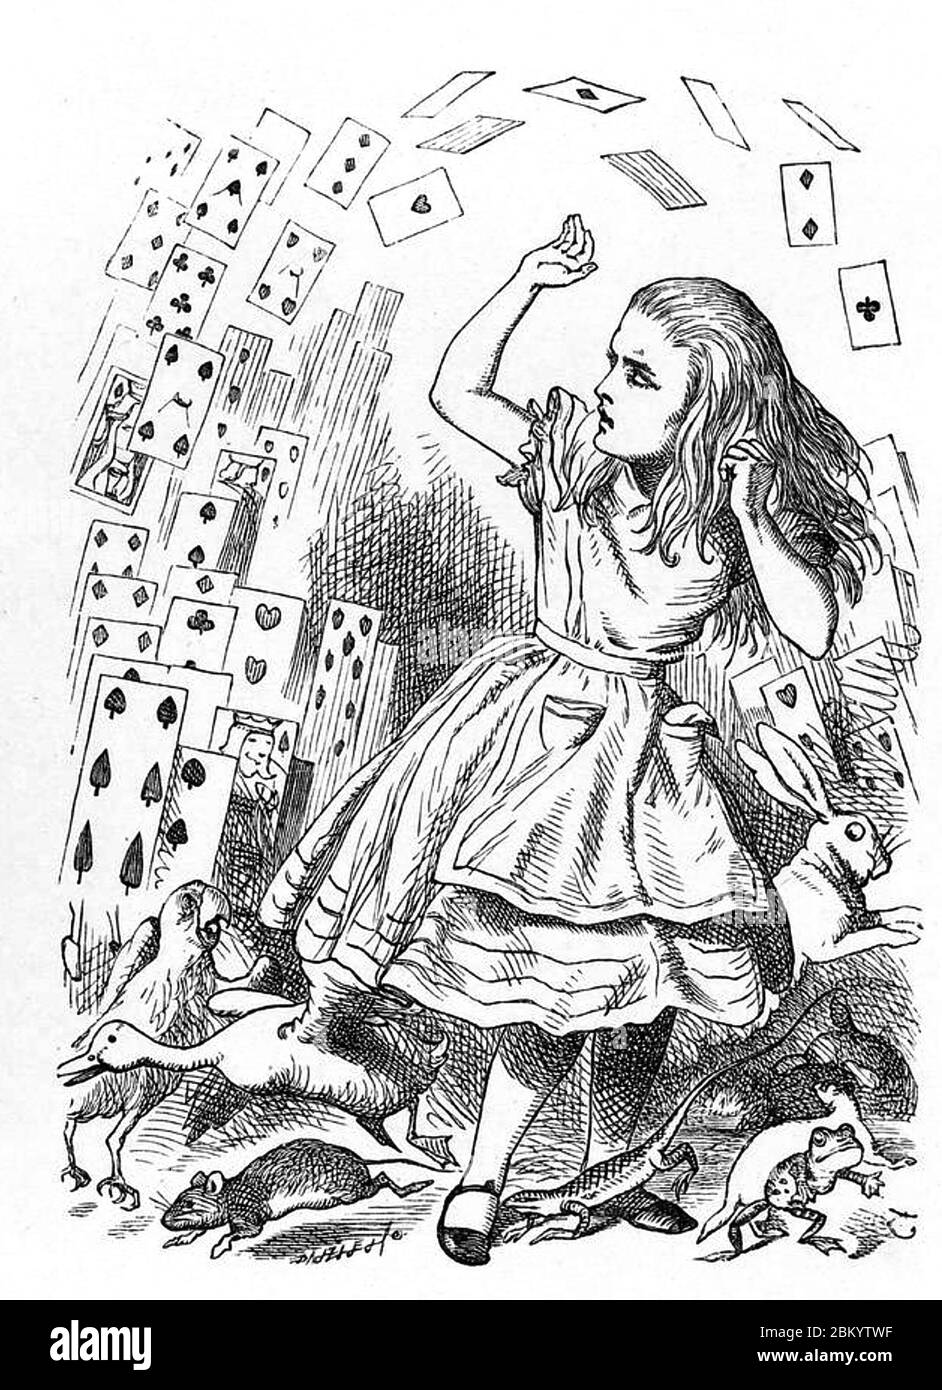 ALICE IN WONDERLAND by Lewis Carroll, 1865. Illustration by John Tenniel as Alice declares 'You're nothing but a pack of cards !' Stock Photo